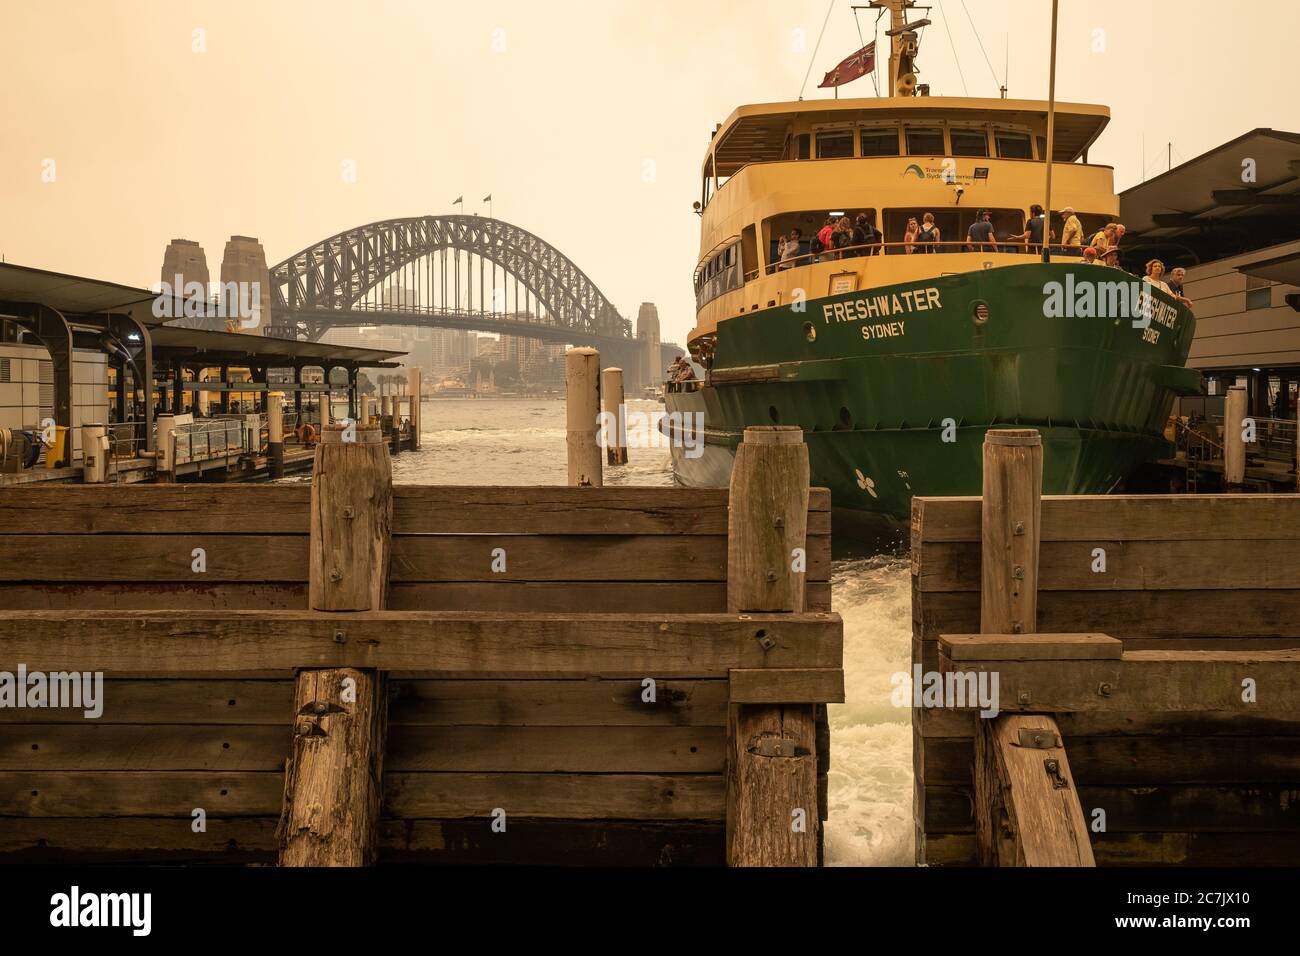 SYDNEY, AUSTRALIA - Dec 06, 2019: View from Circular Quay on the pollution affecting Sydney city. One of the most severe bush fires in NSW history aff Stock Photo